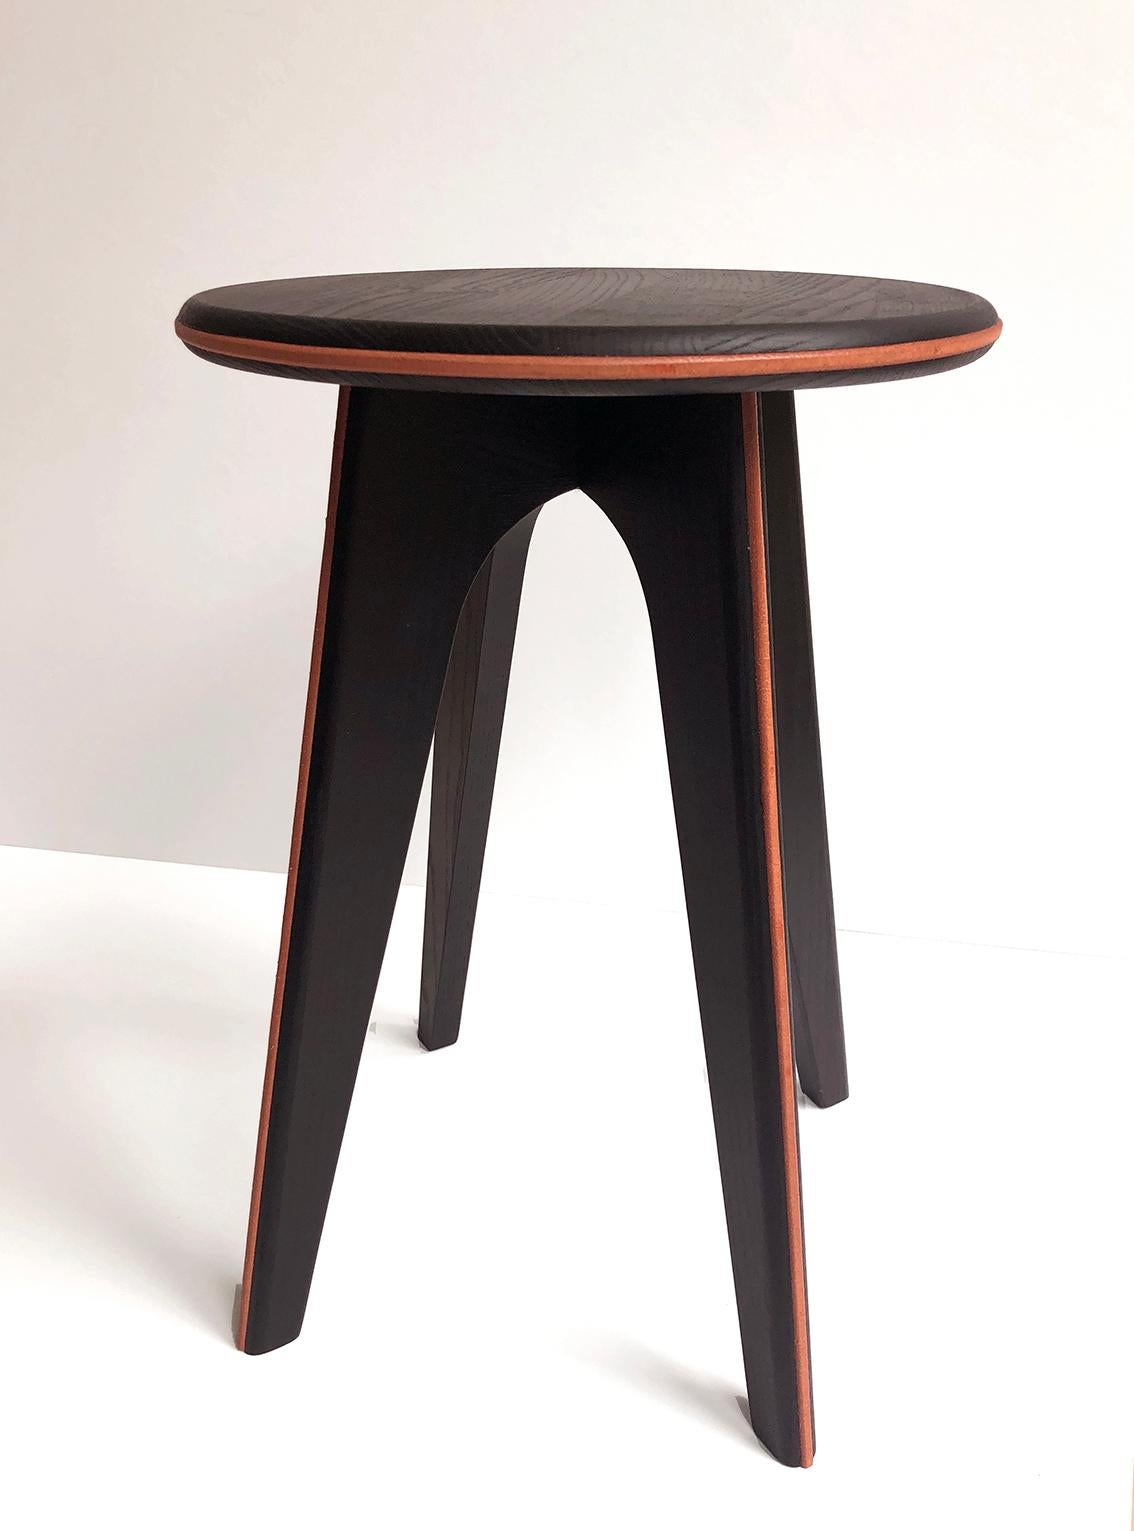 Black Stained Ash and Orange Leather Stool by Mademoiselle Jo
Dimensions: Ø 35 x H 43 cm.
Materials: Black stained ash and orange leather.

Available in two wood colors and several designs.  Please contact us.

At the border between design and